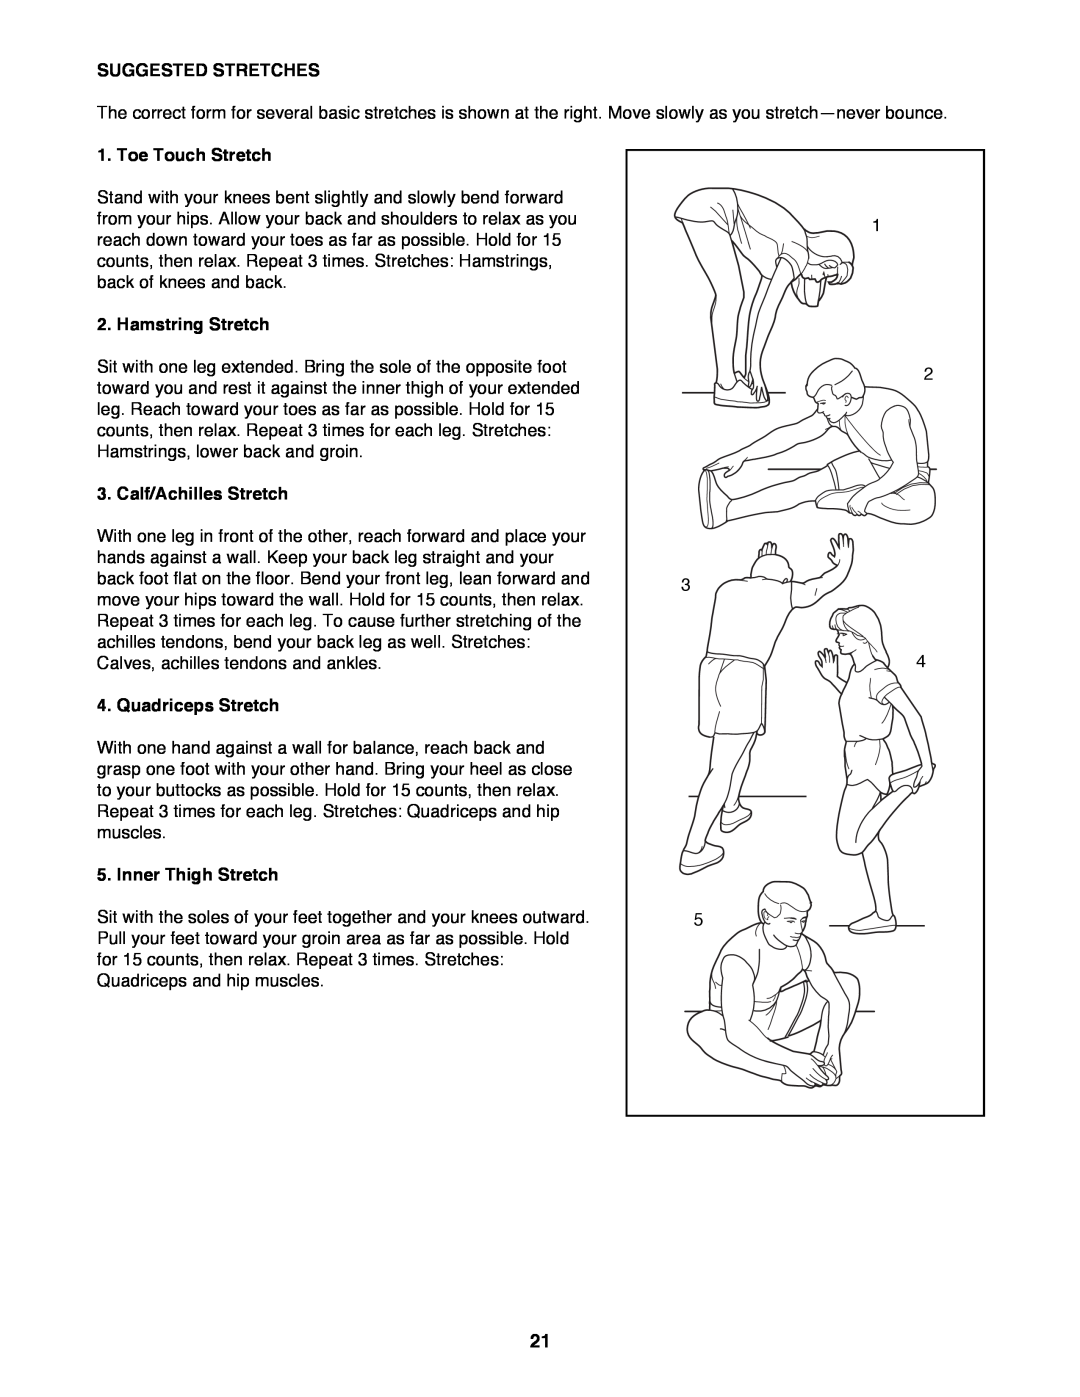 Reebok Fitness RBTL11981 manual Suggested Stretches, Toe Touch Stretch, Hamstring Stretch, Calf/Achilles Stretch 